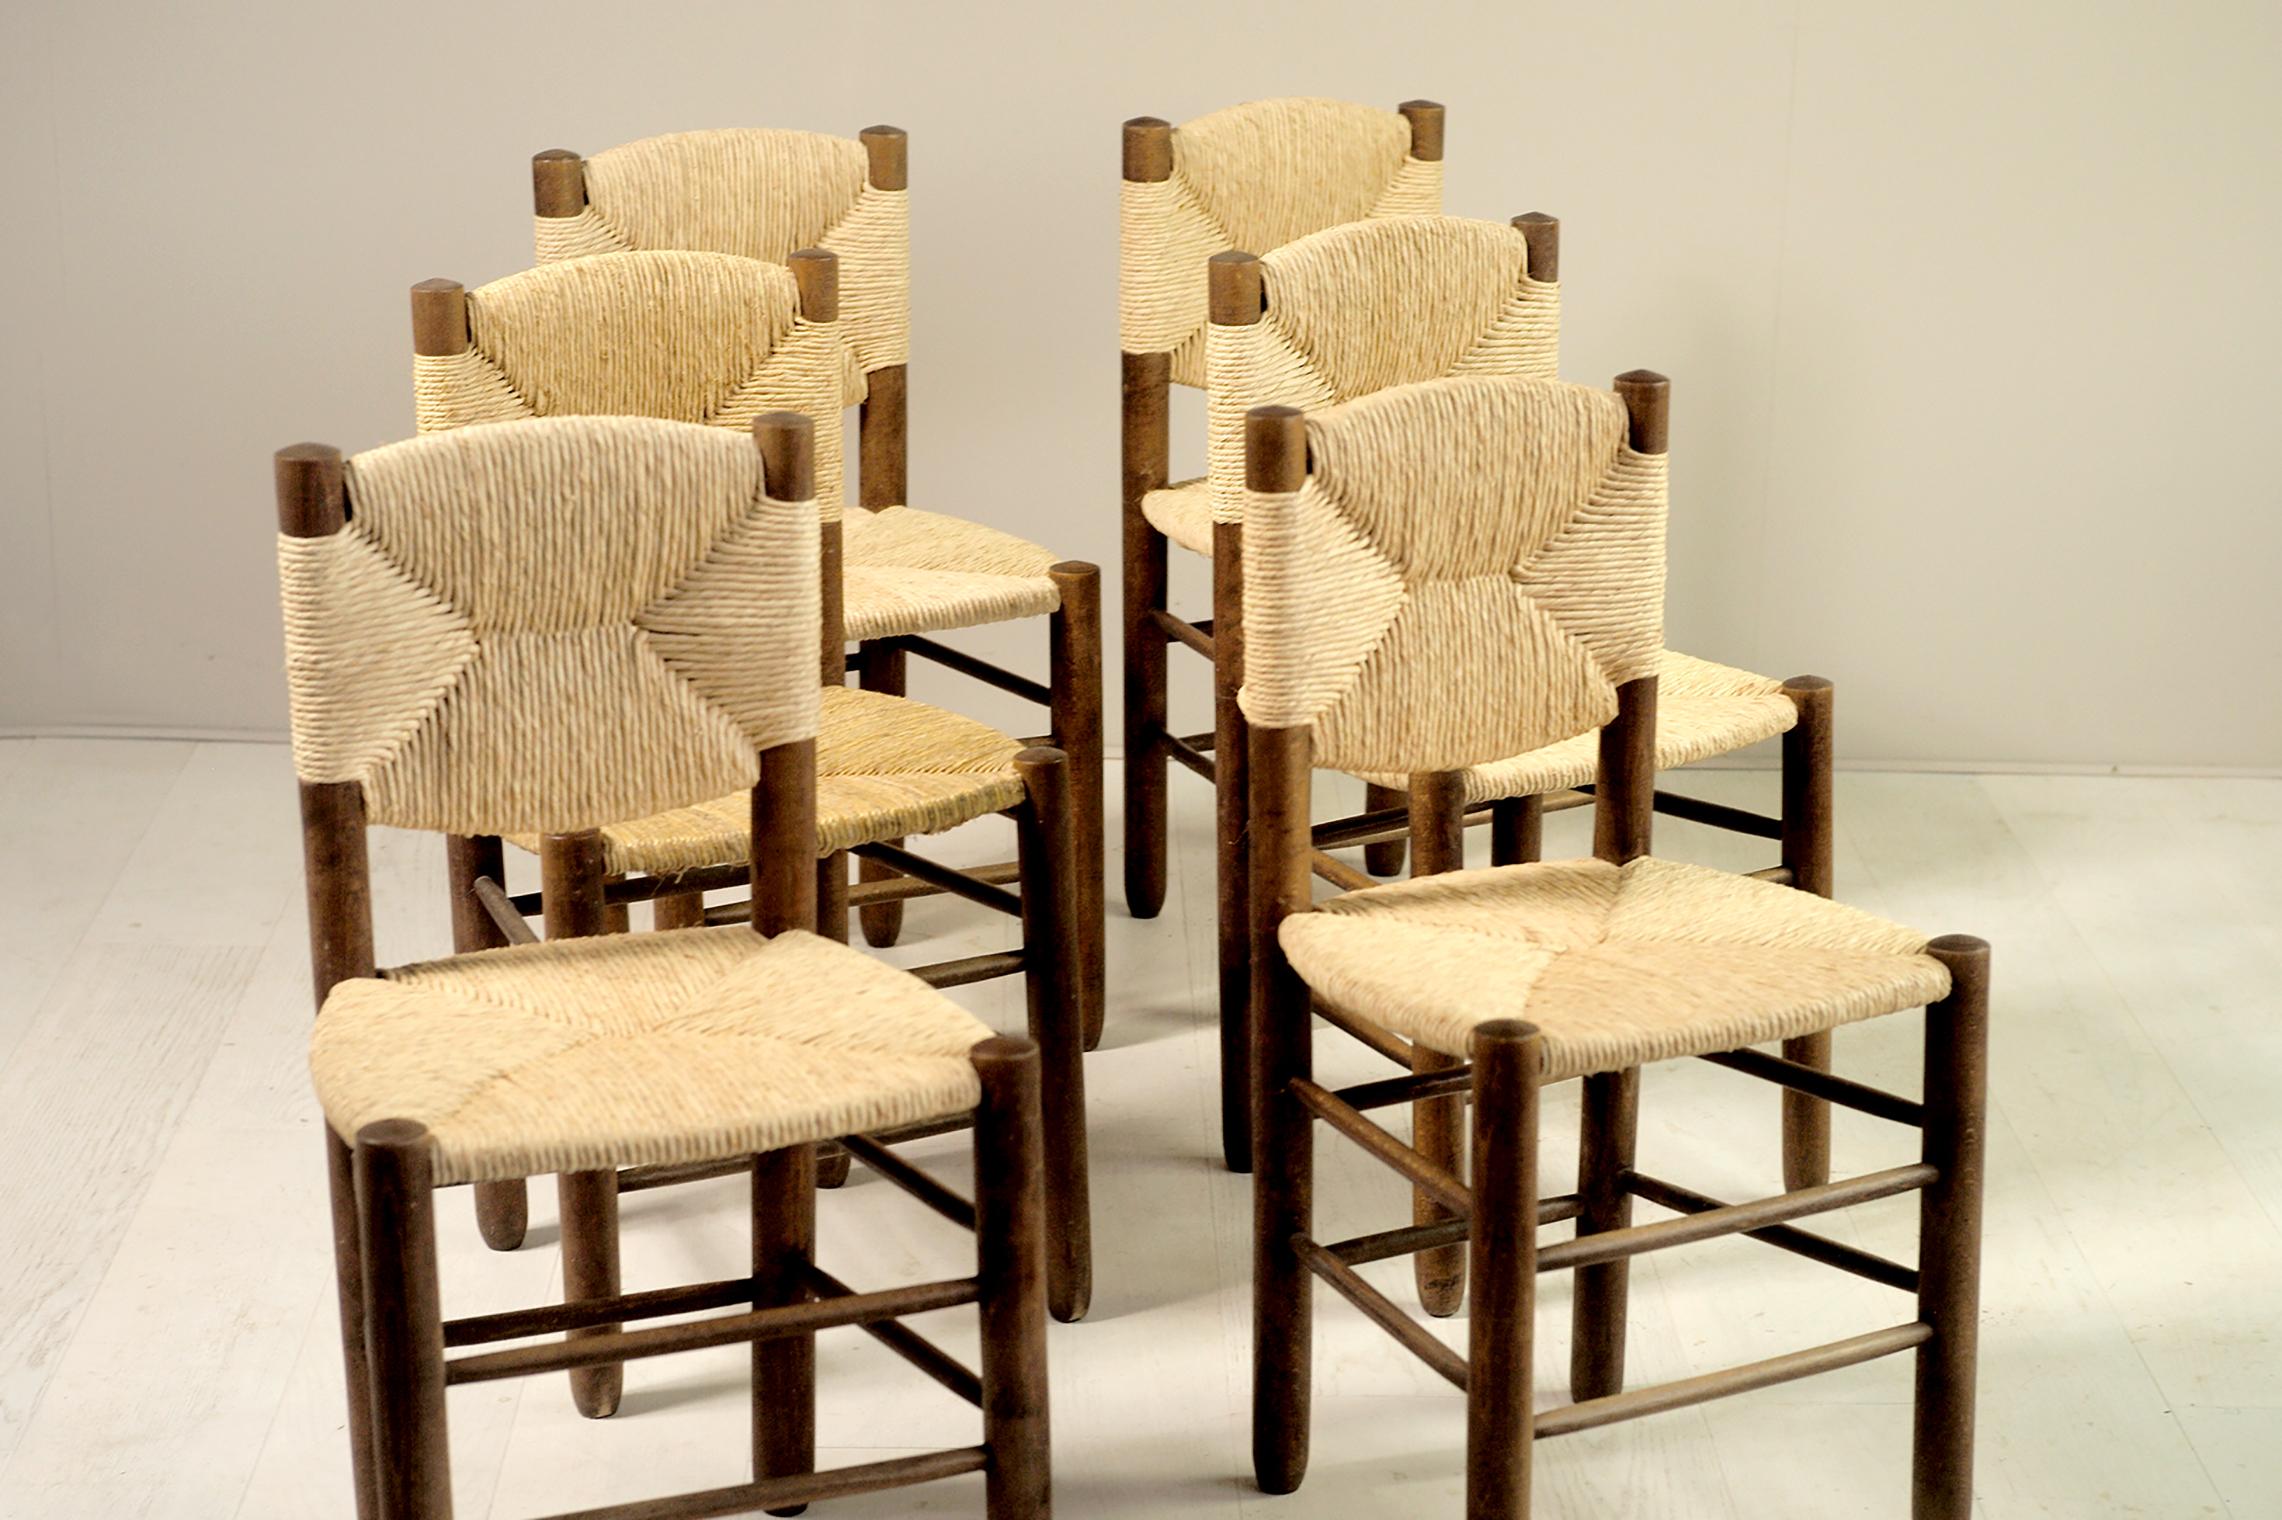 French Charlotte Perriand, Set of 6 Chair N° 18 Bauche, France, 1950